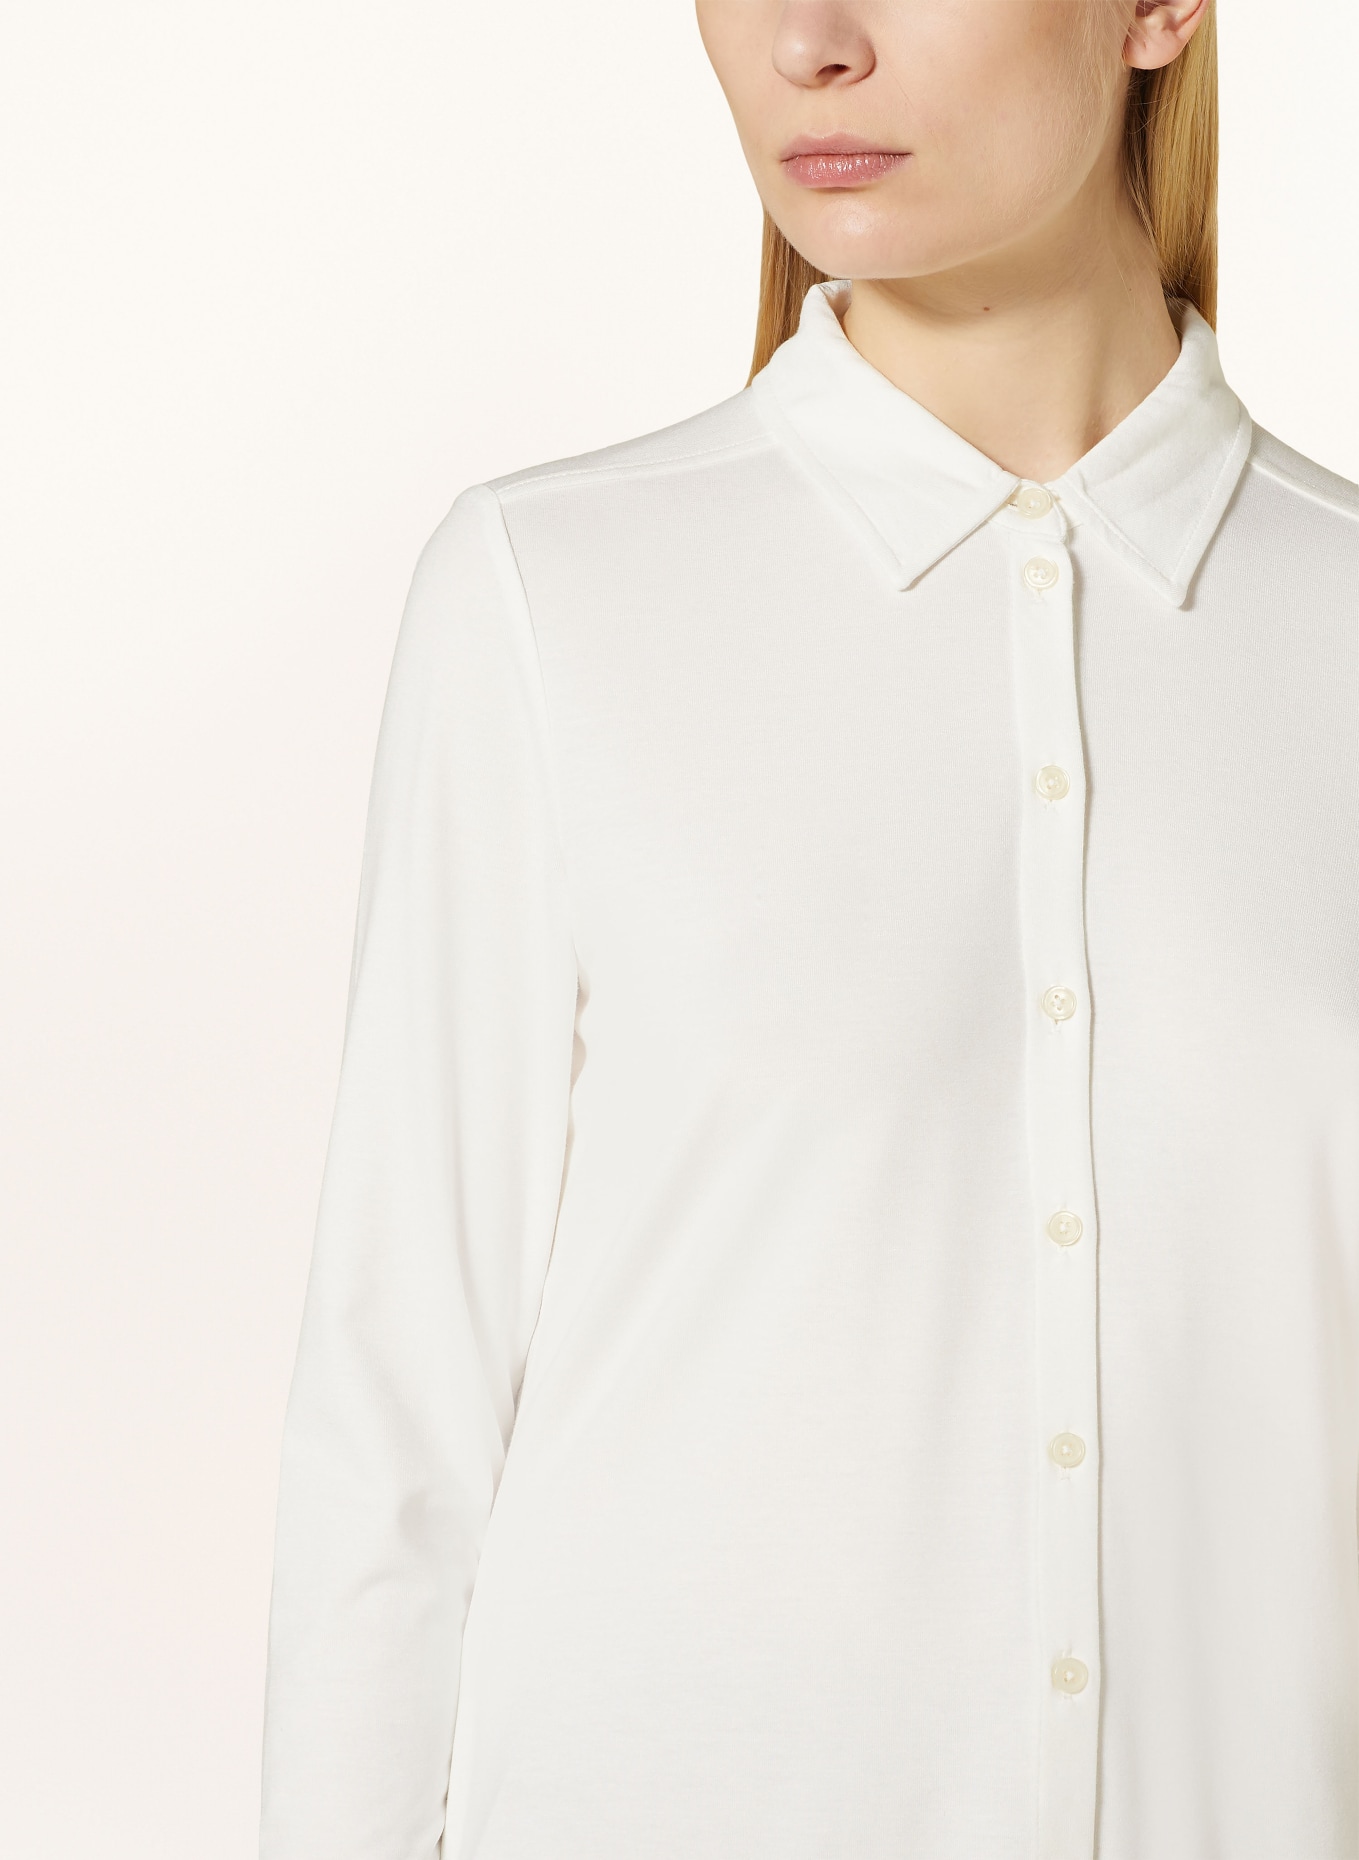 Marc O'Polo Shirt blouse made of jersey, Color: WHITE (Image 4)